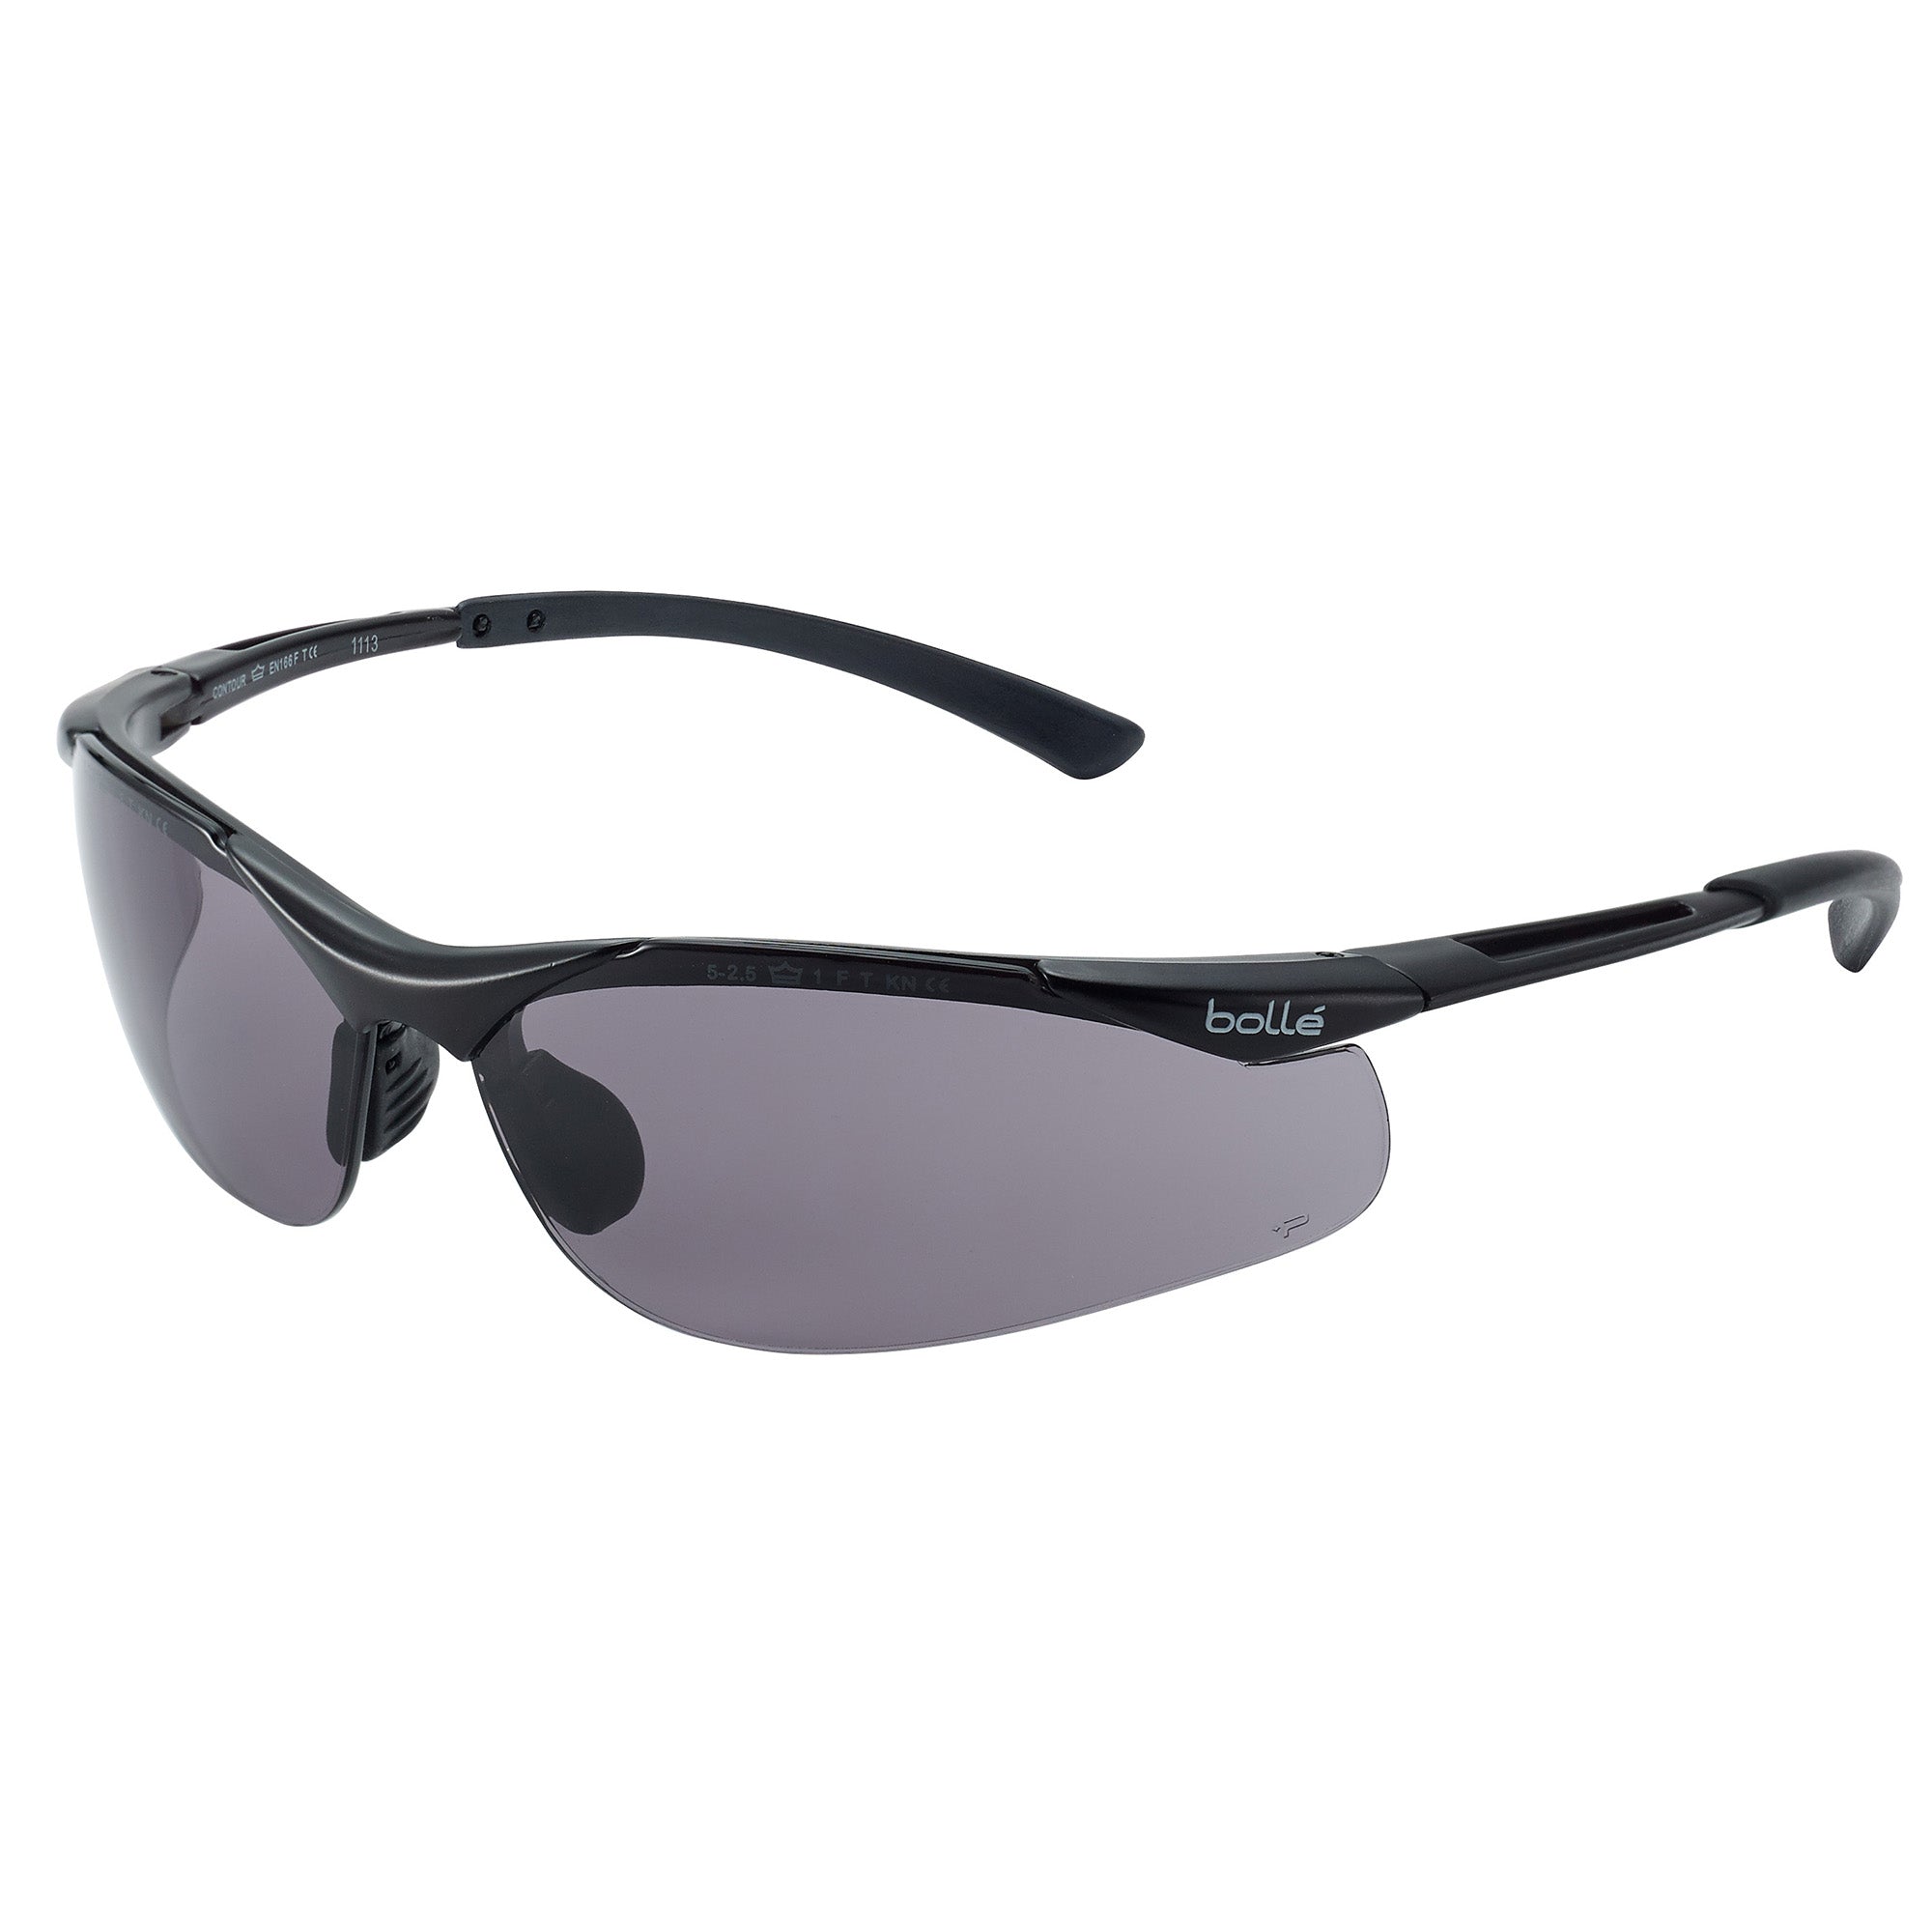 Bolle CONTOUR CONTPSF Safety Glasses Smoke Lens